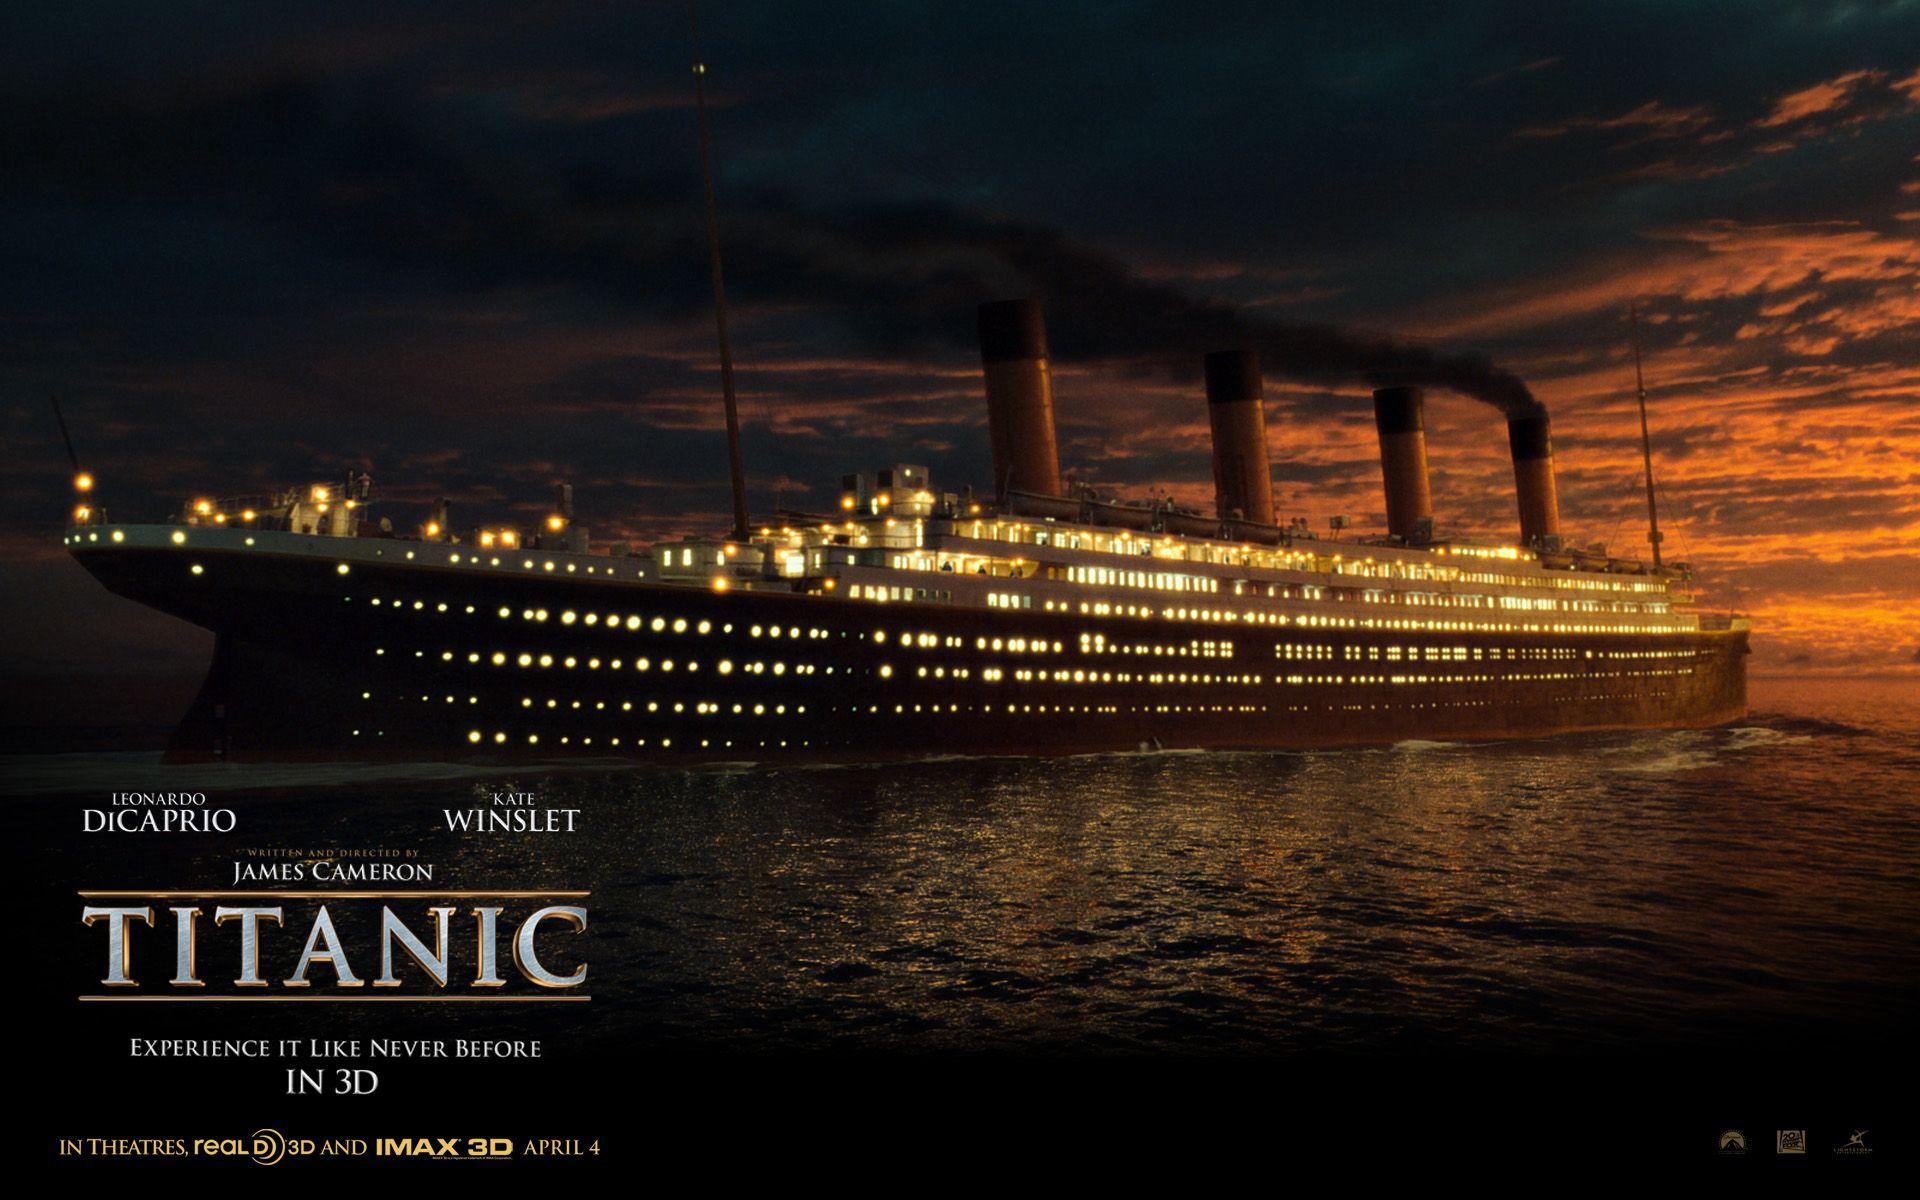 Titanic (2012) image Posters HD wallpaper and background photo